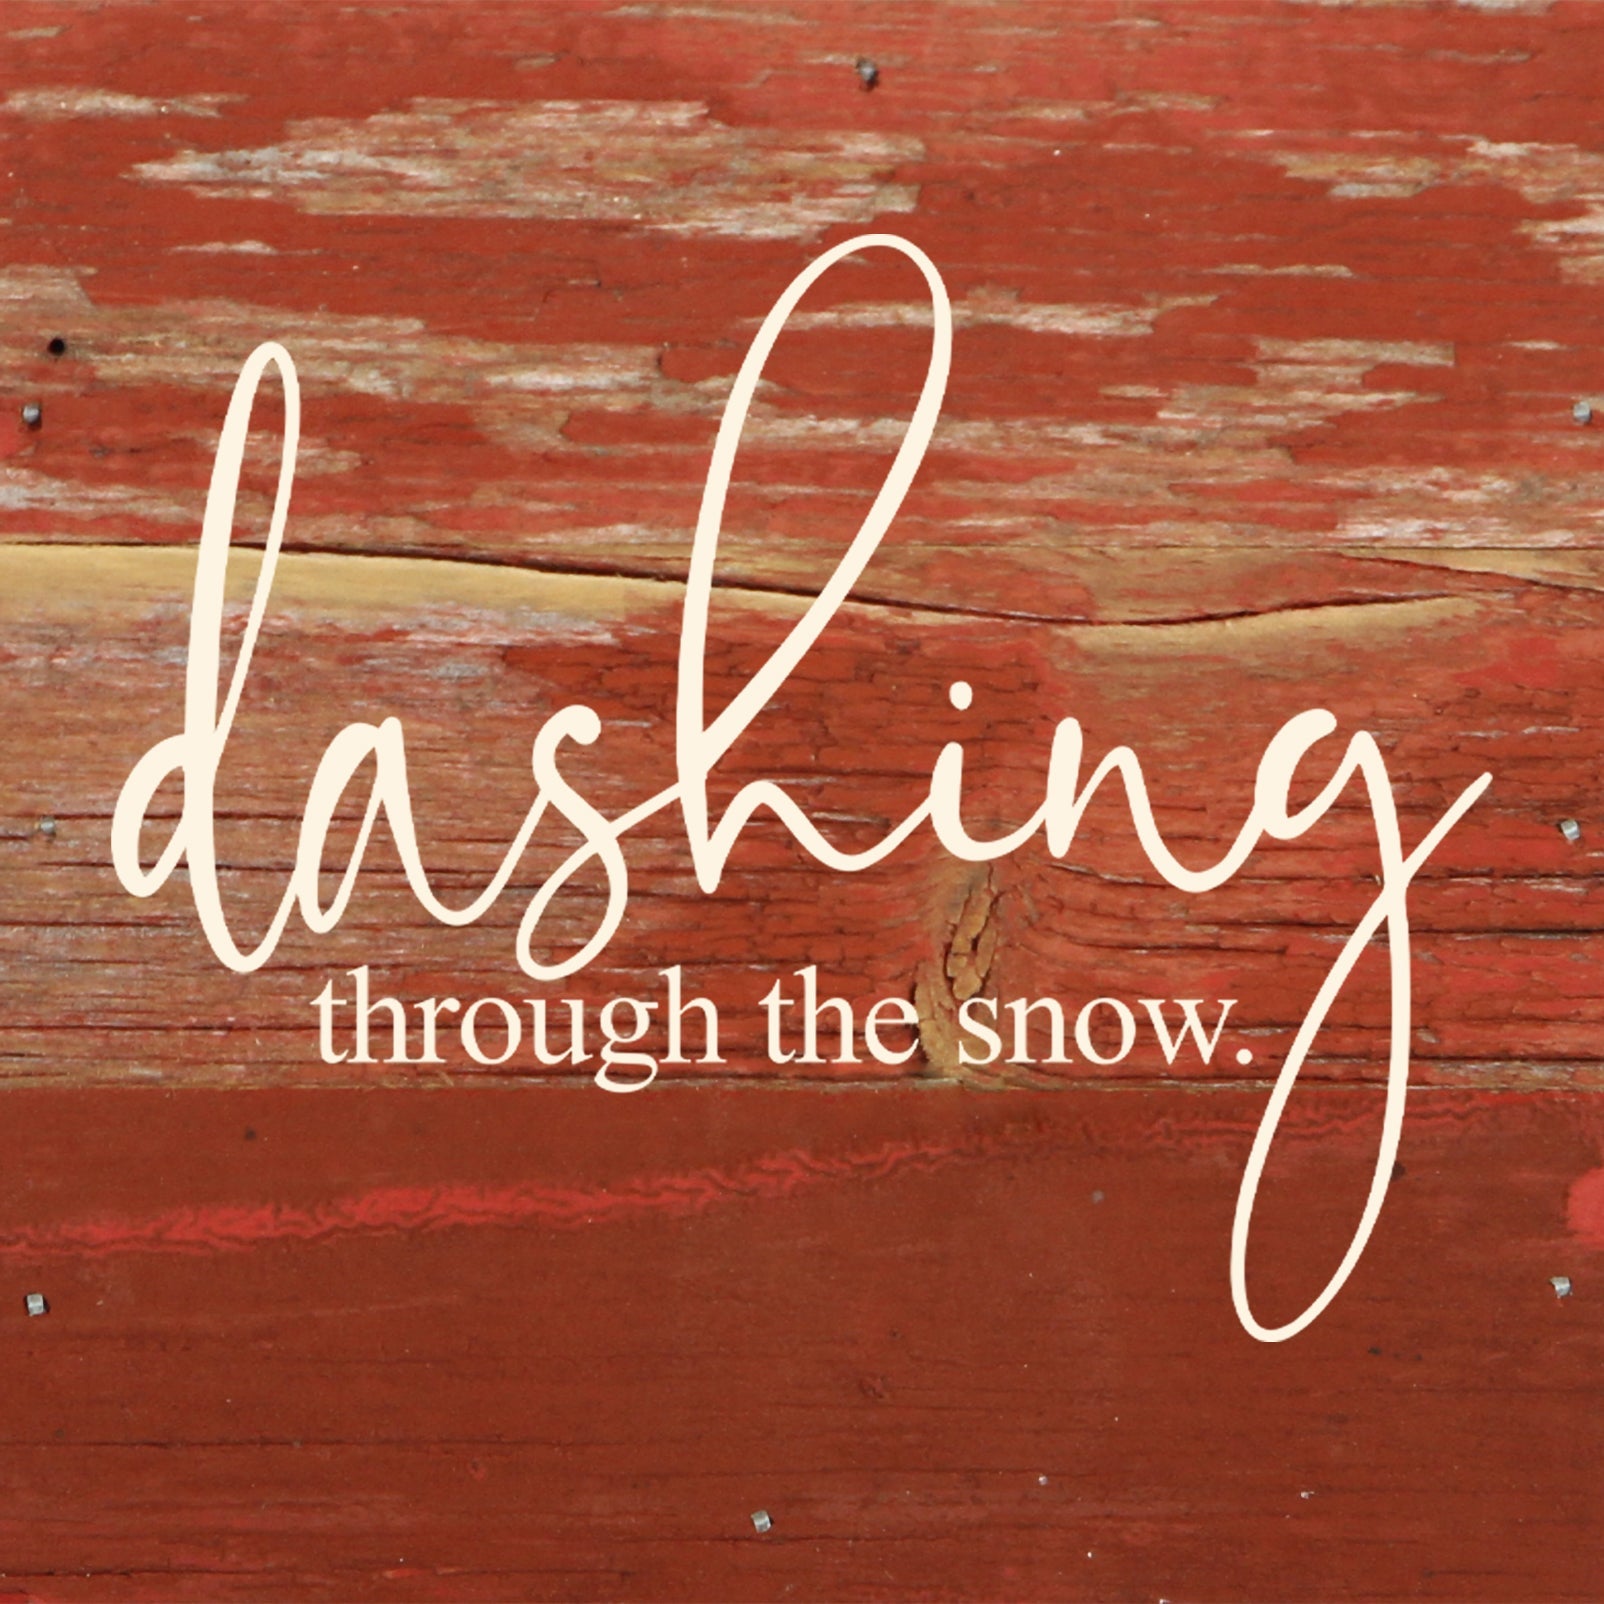 Dashing through the snow. / 6"x6" Reclaimed Wood Sign